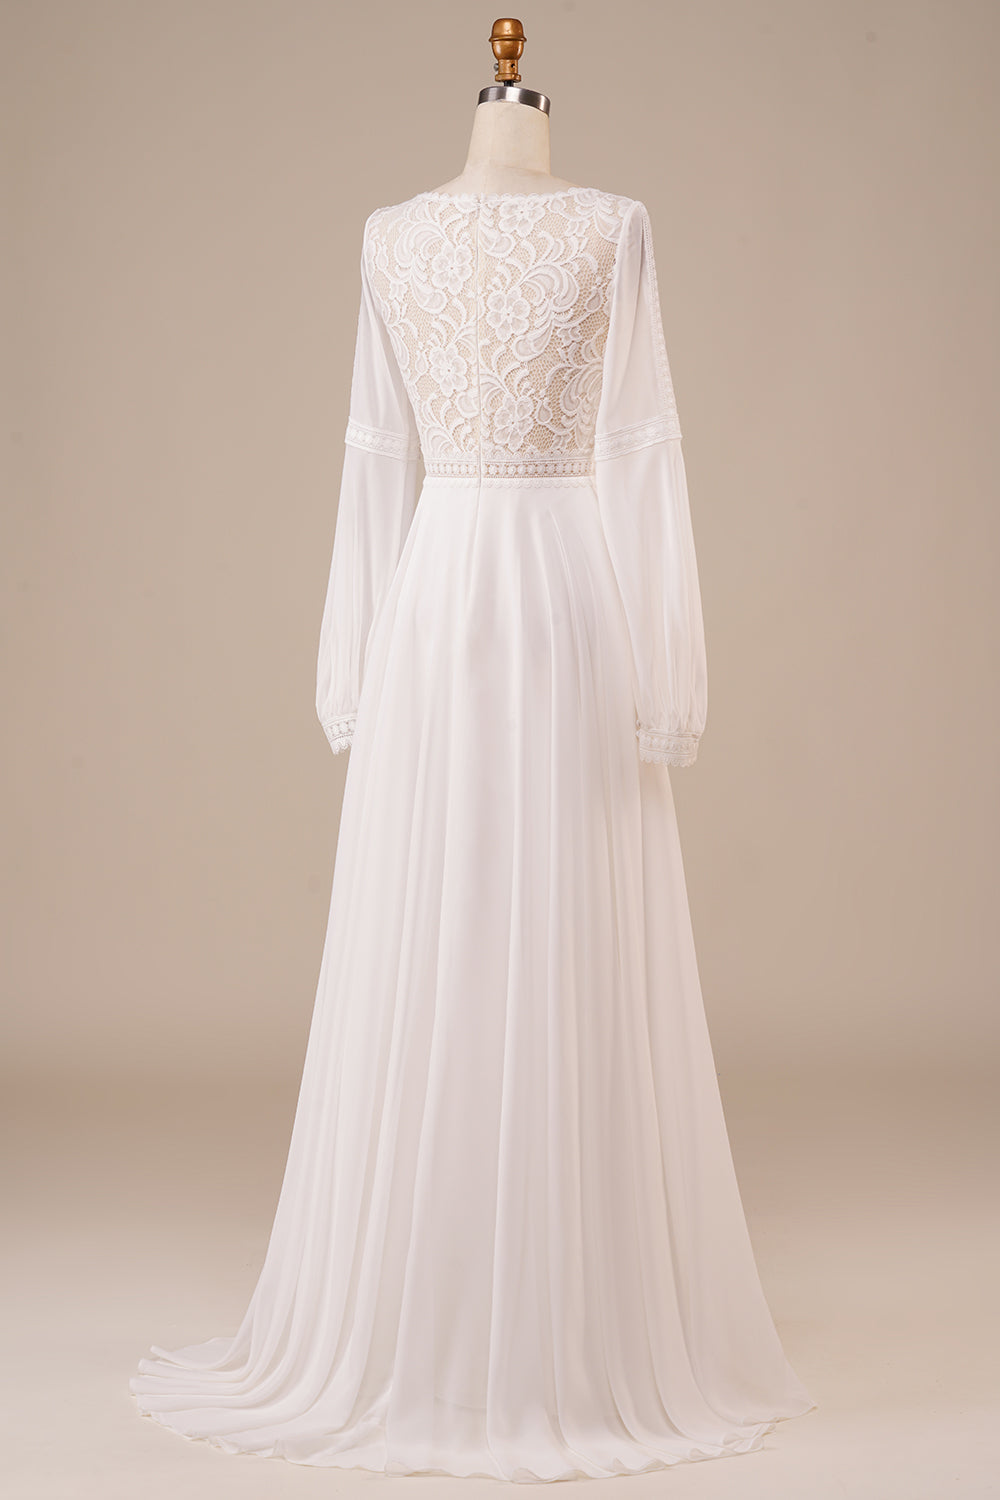 Long Sleeves Ivory Wedding Dress with Lace